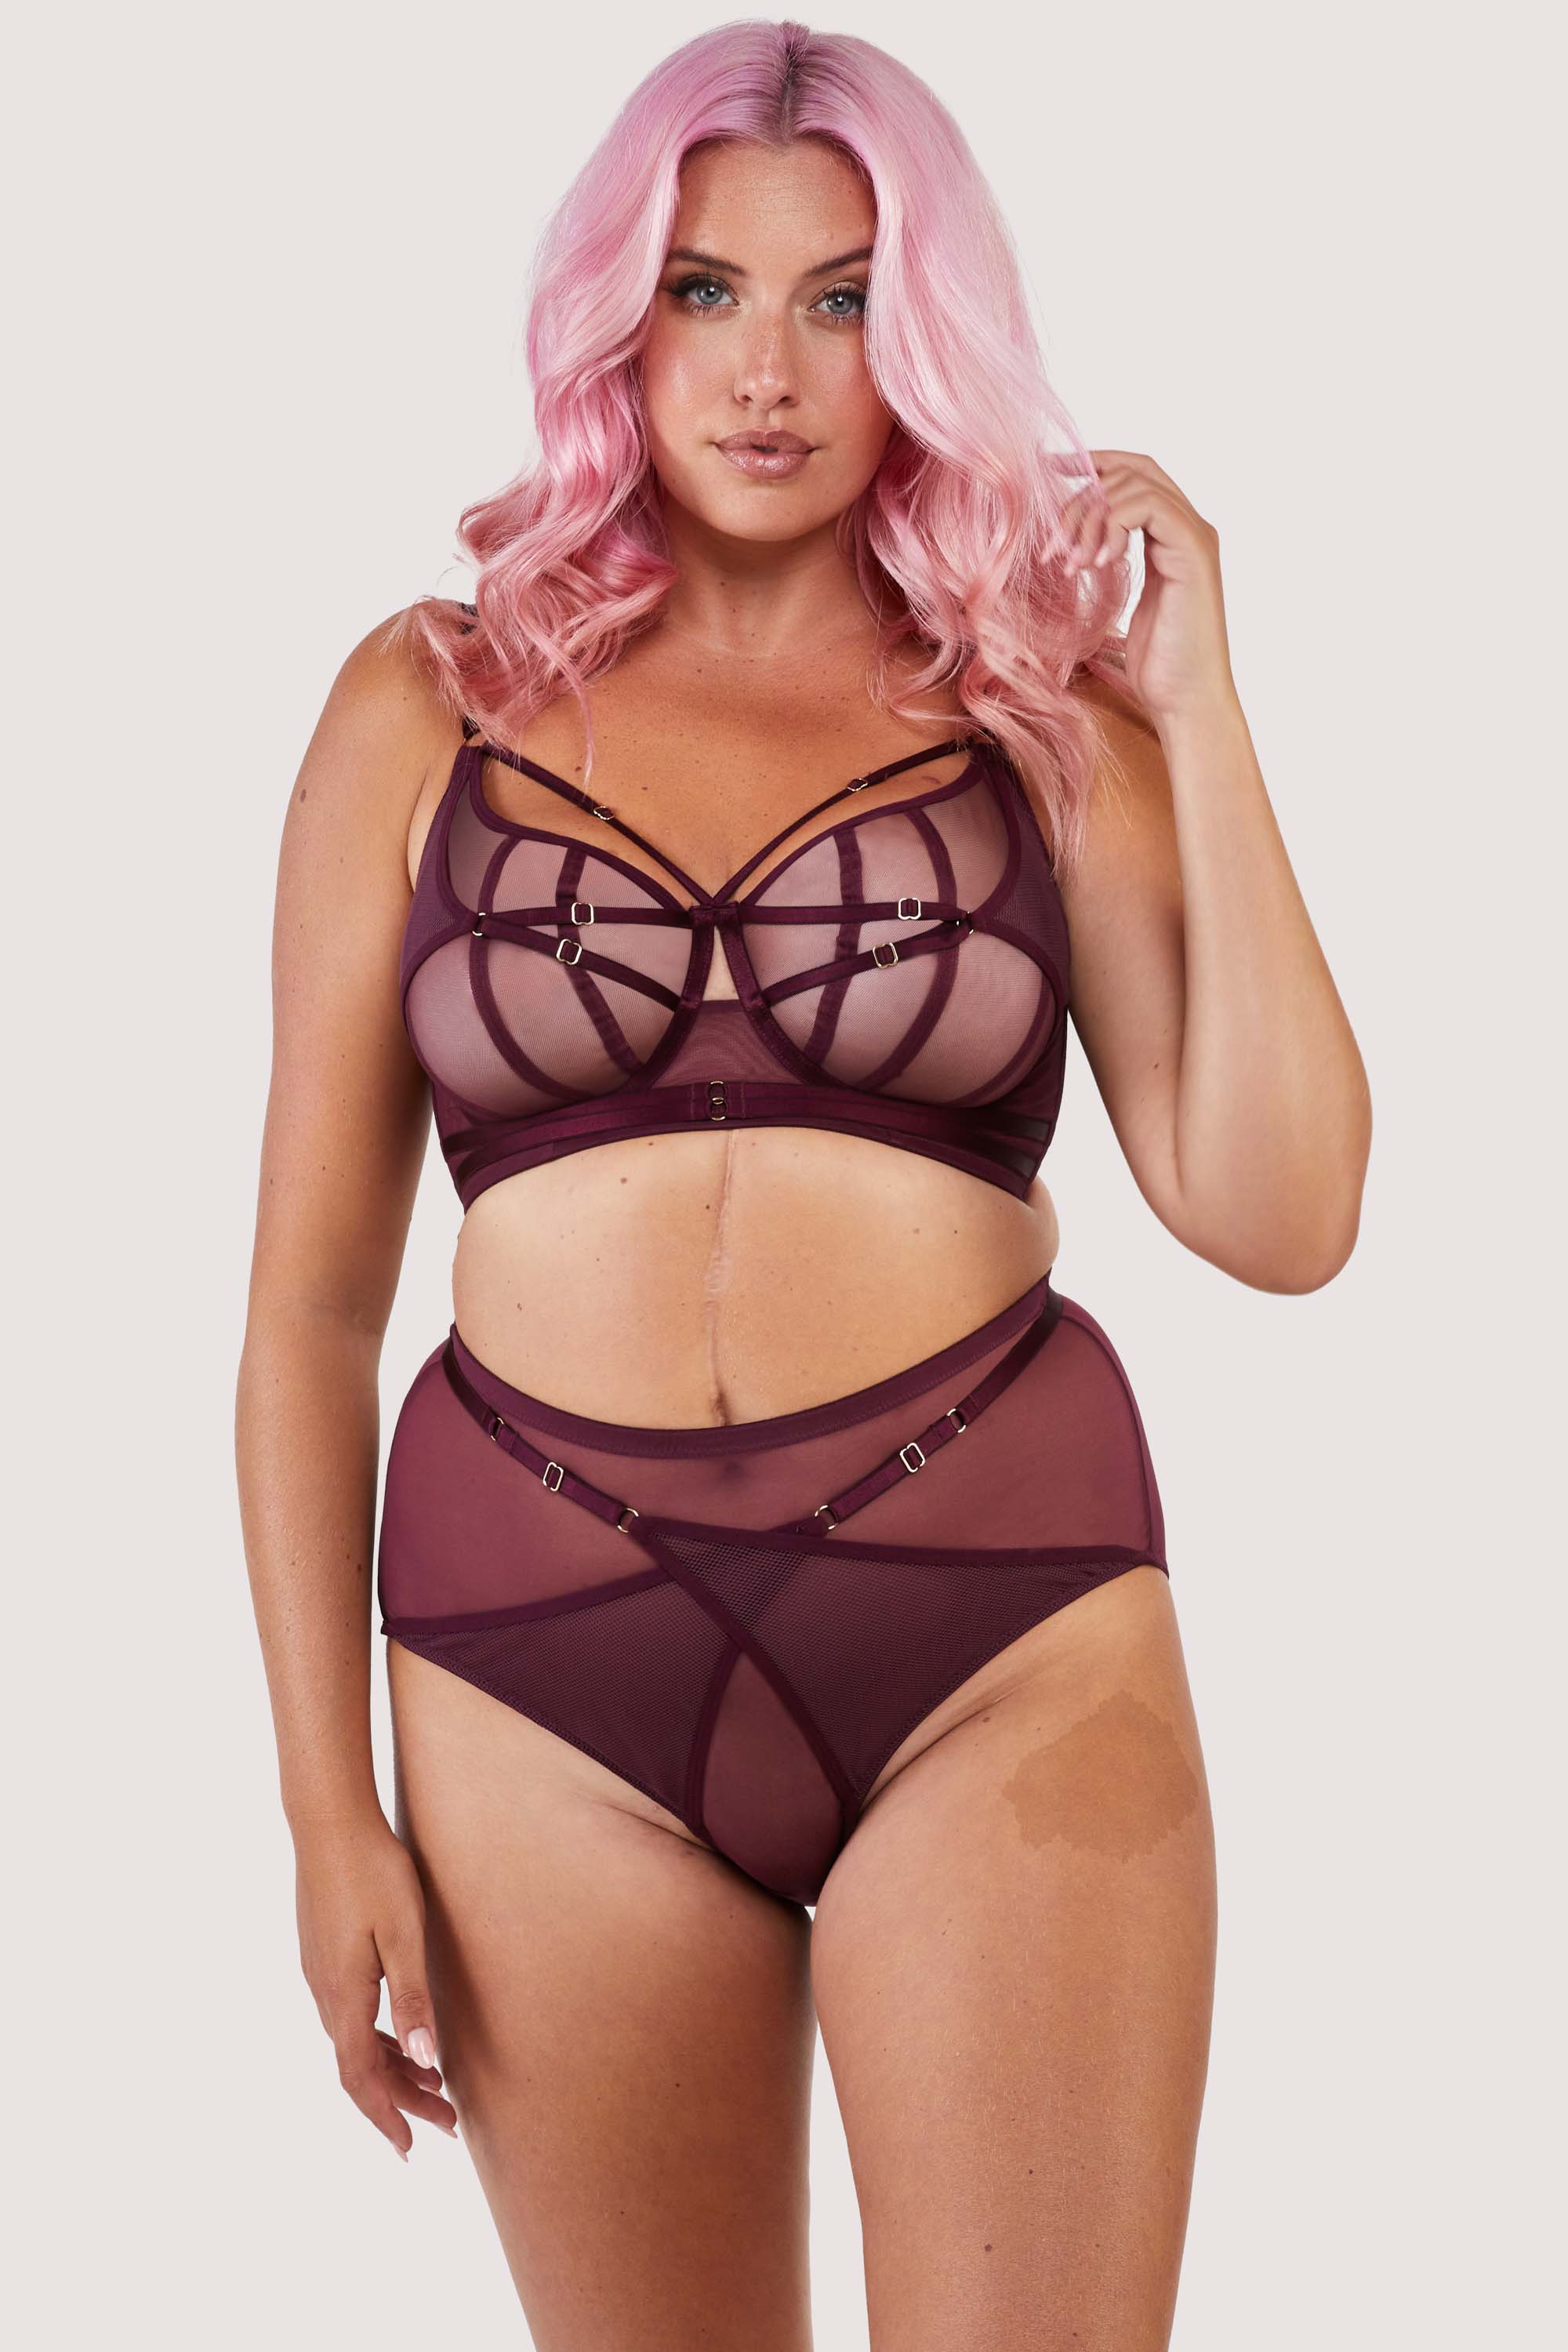 Dark purple-red mesh brief with visible gold hardware and crossover panelling across the front, paired with matching harness bra.